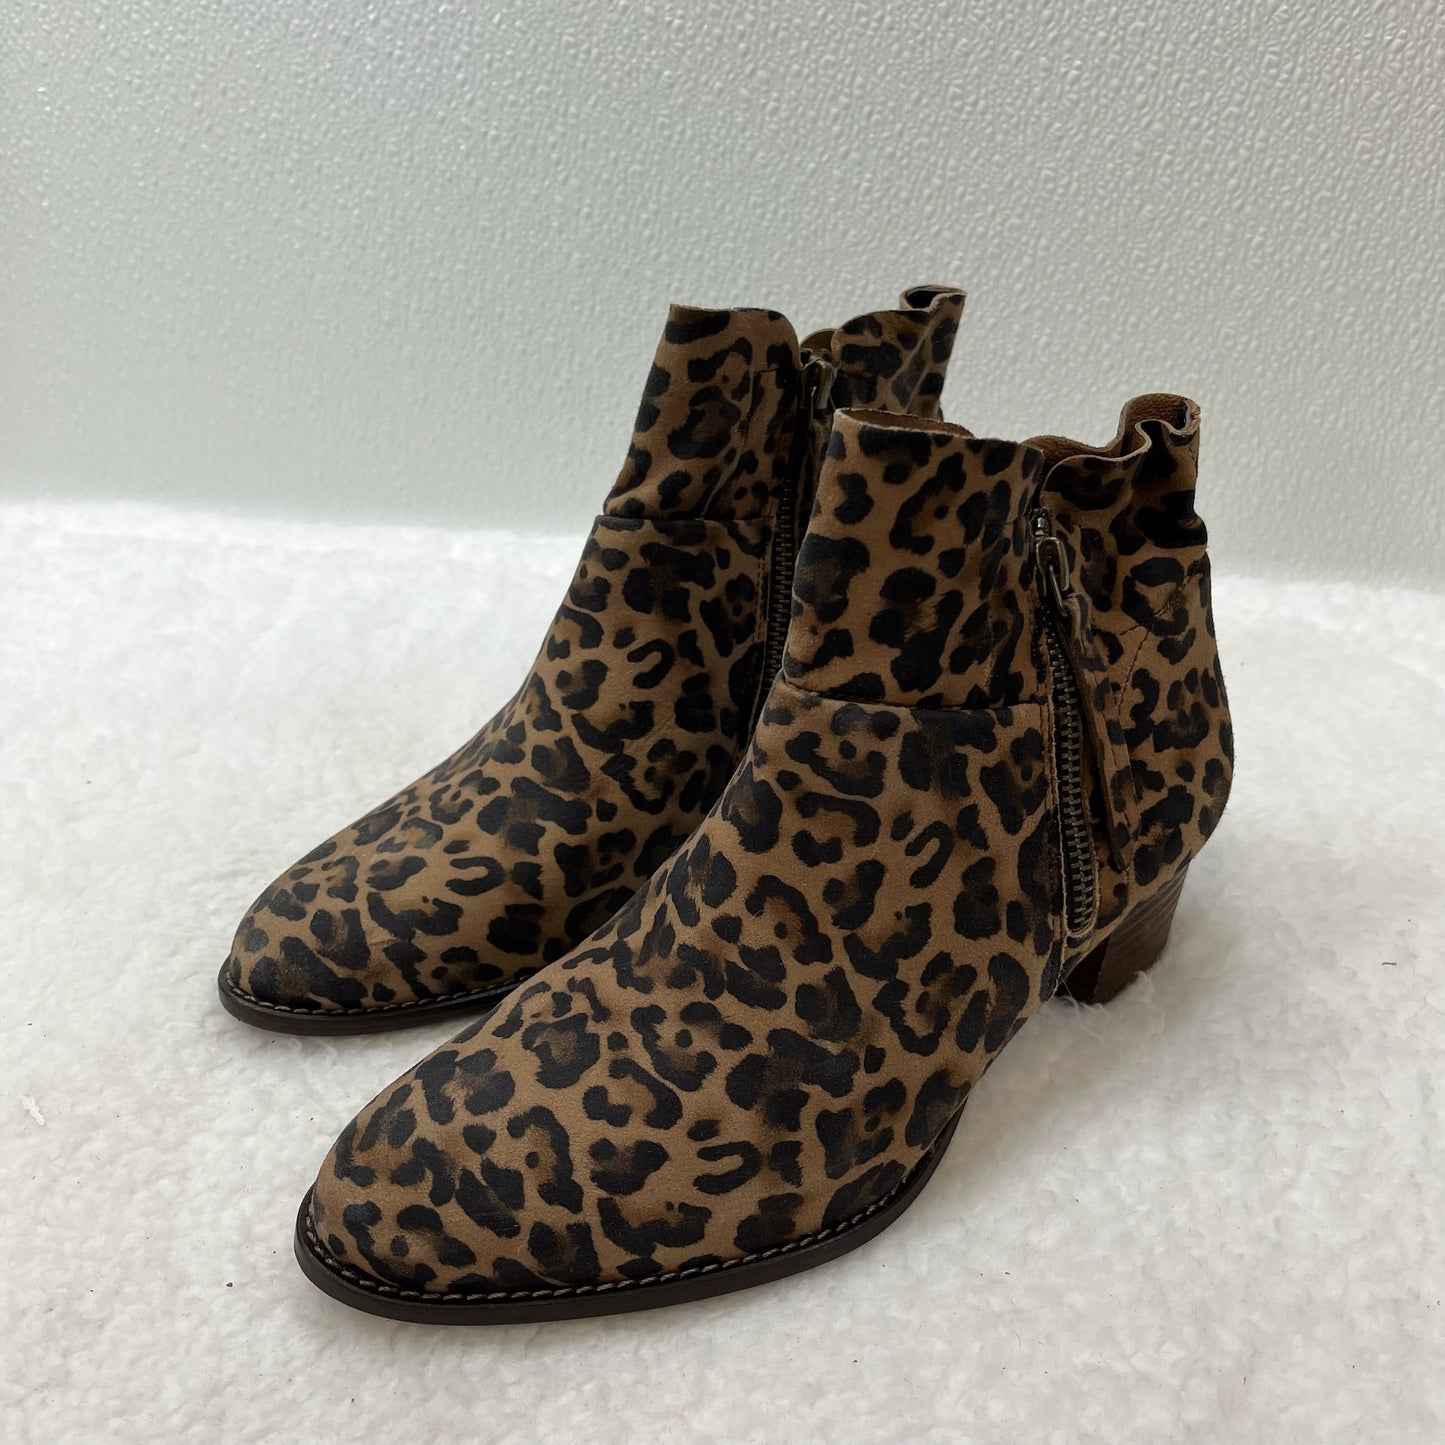 Animal Print Boots Ankle Heels Paul Green, Size 6.5